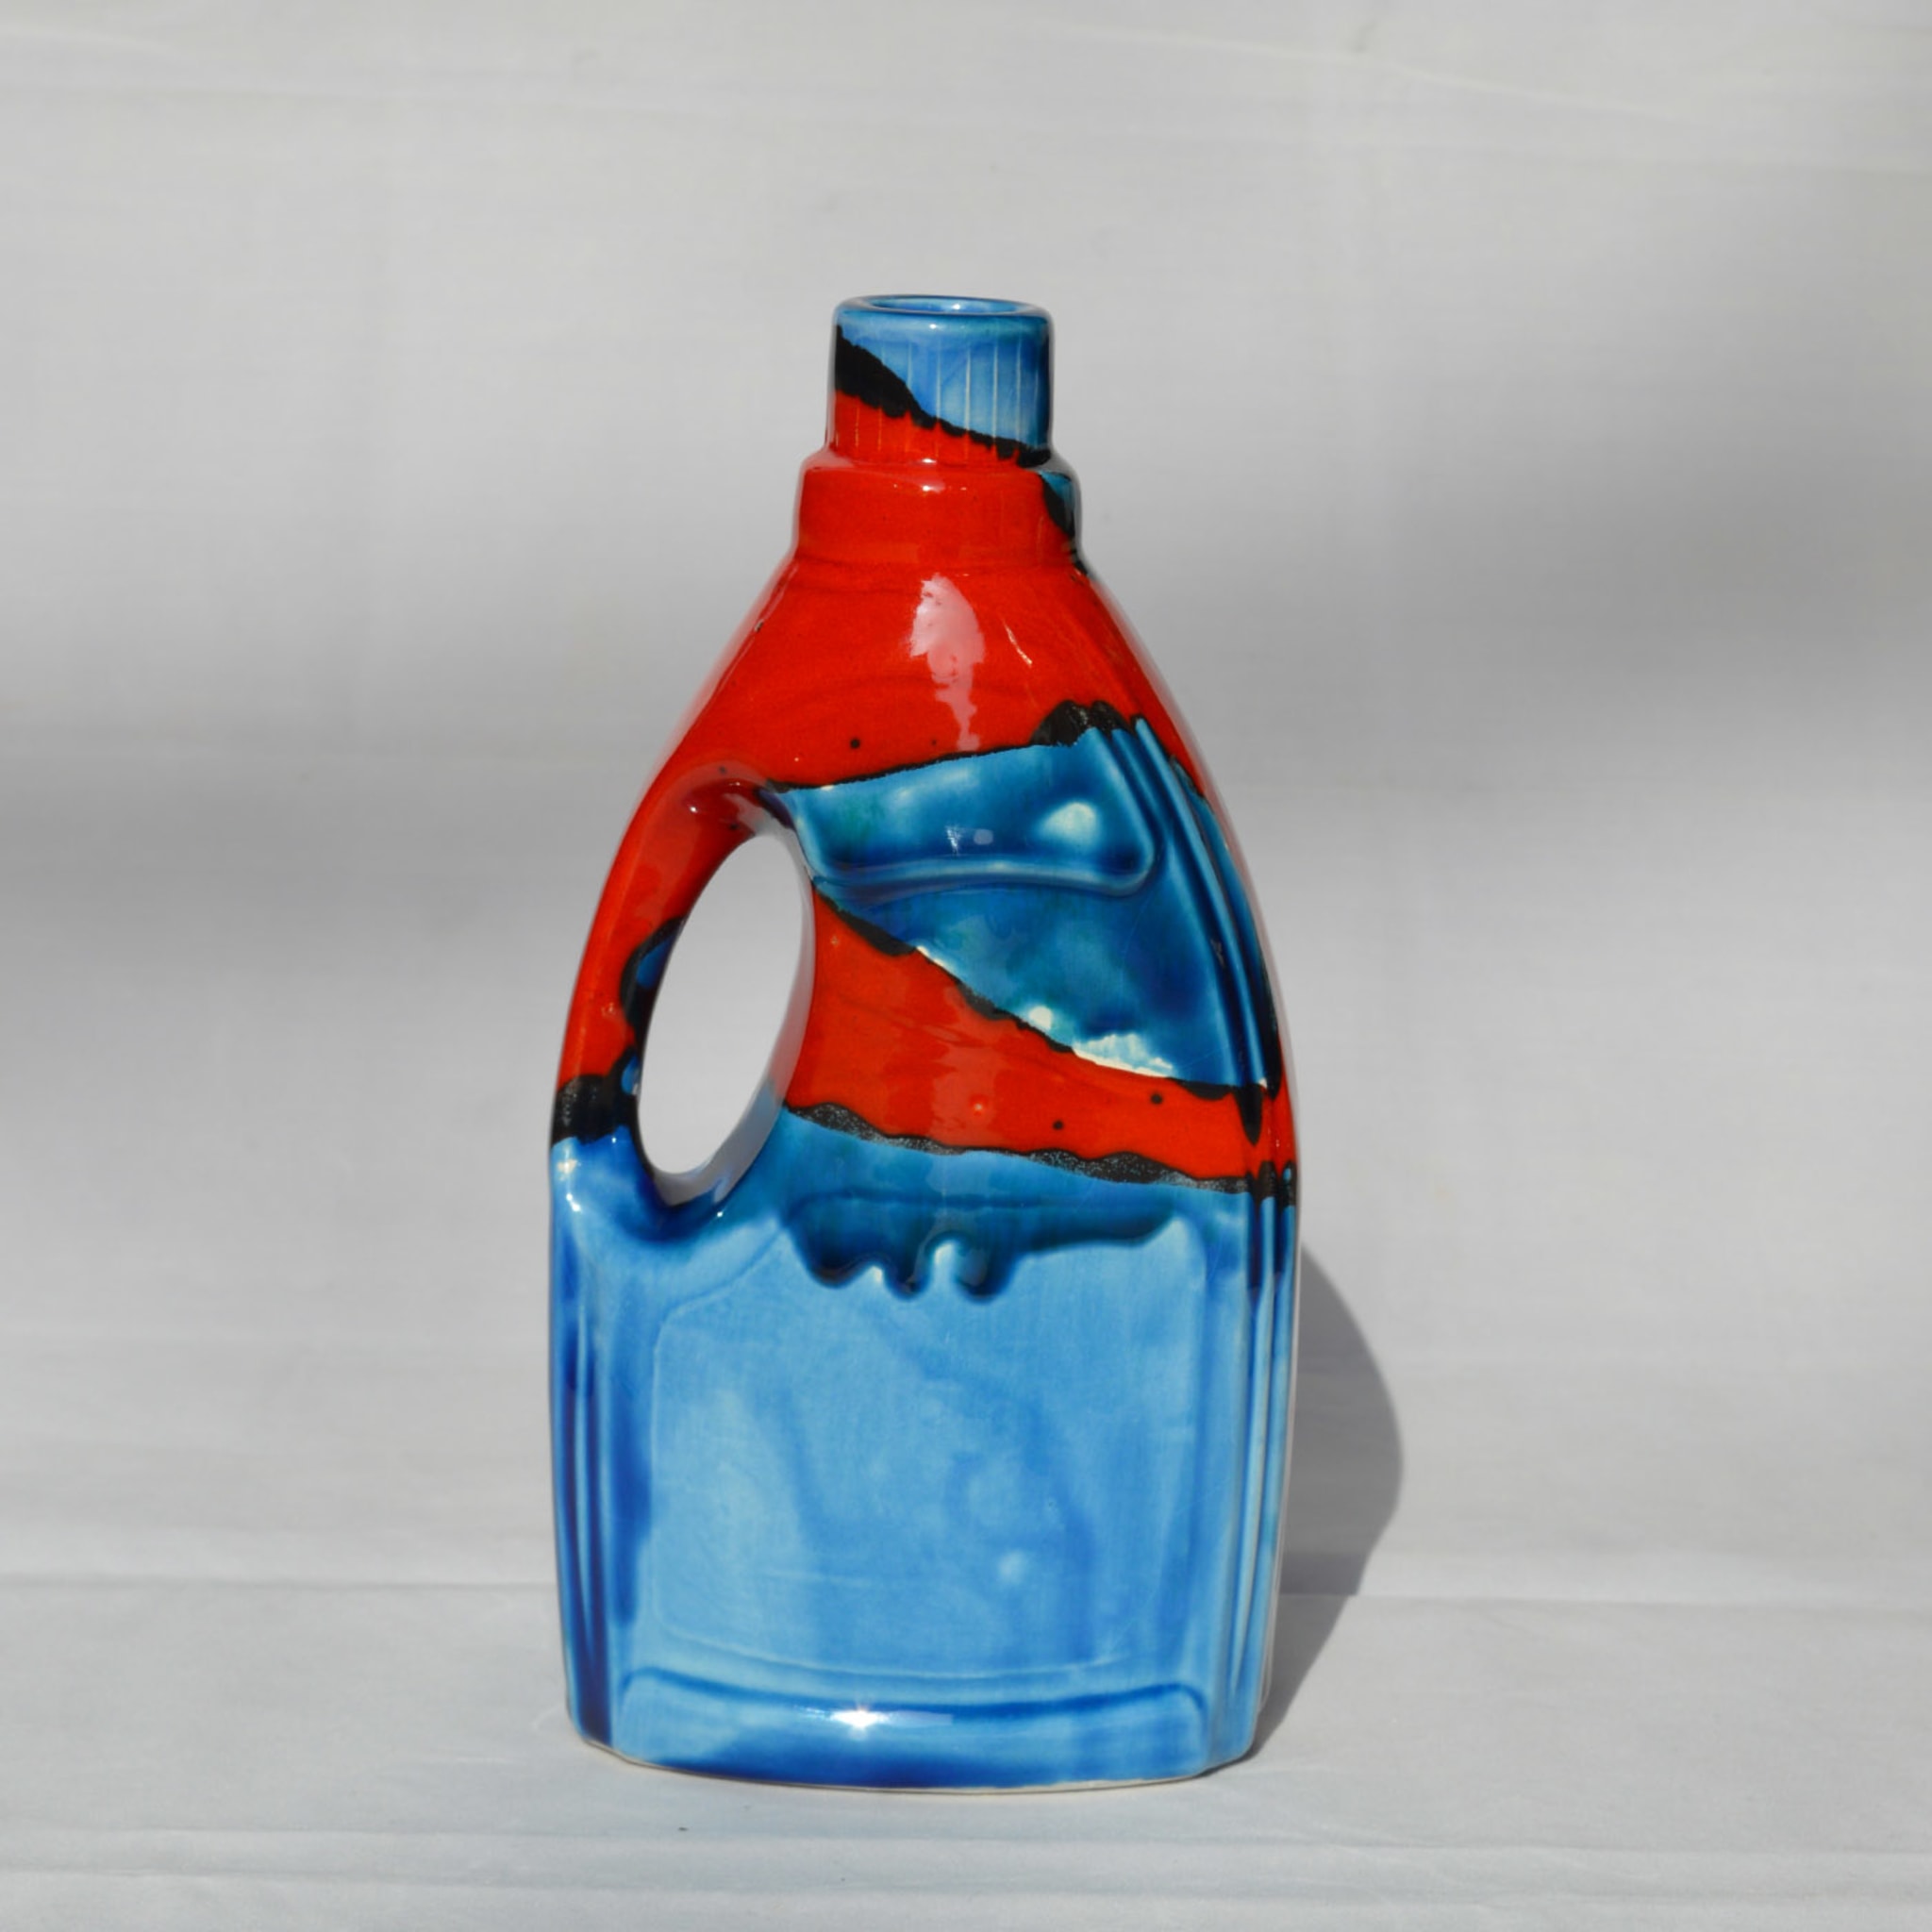 More Clay Less Plastic Blue and Red Bottle - Alternative view 1